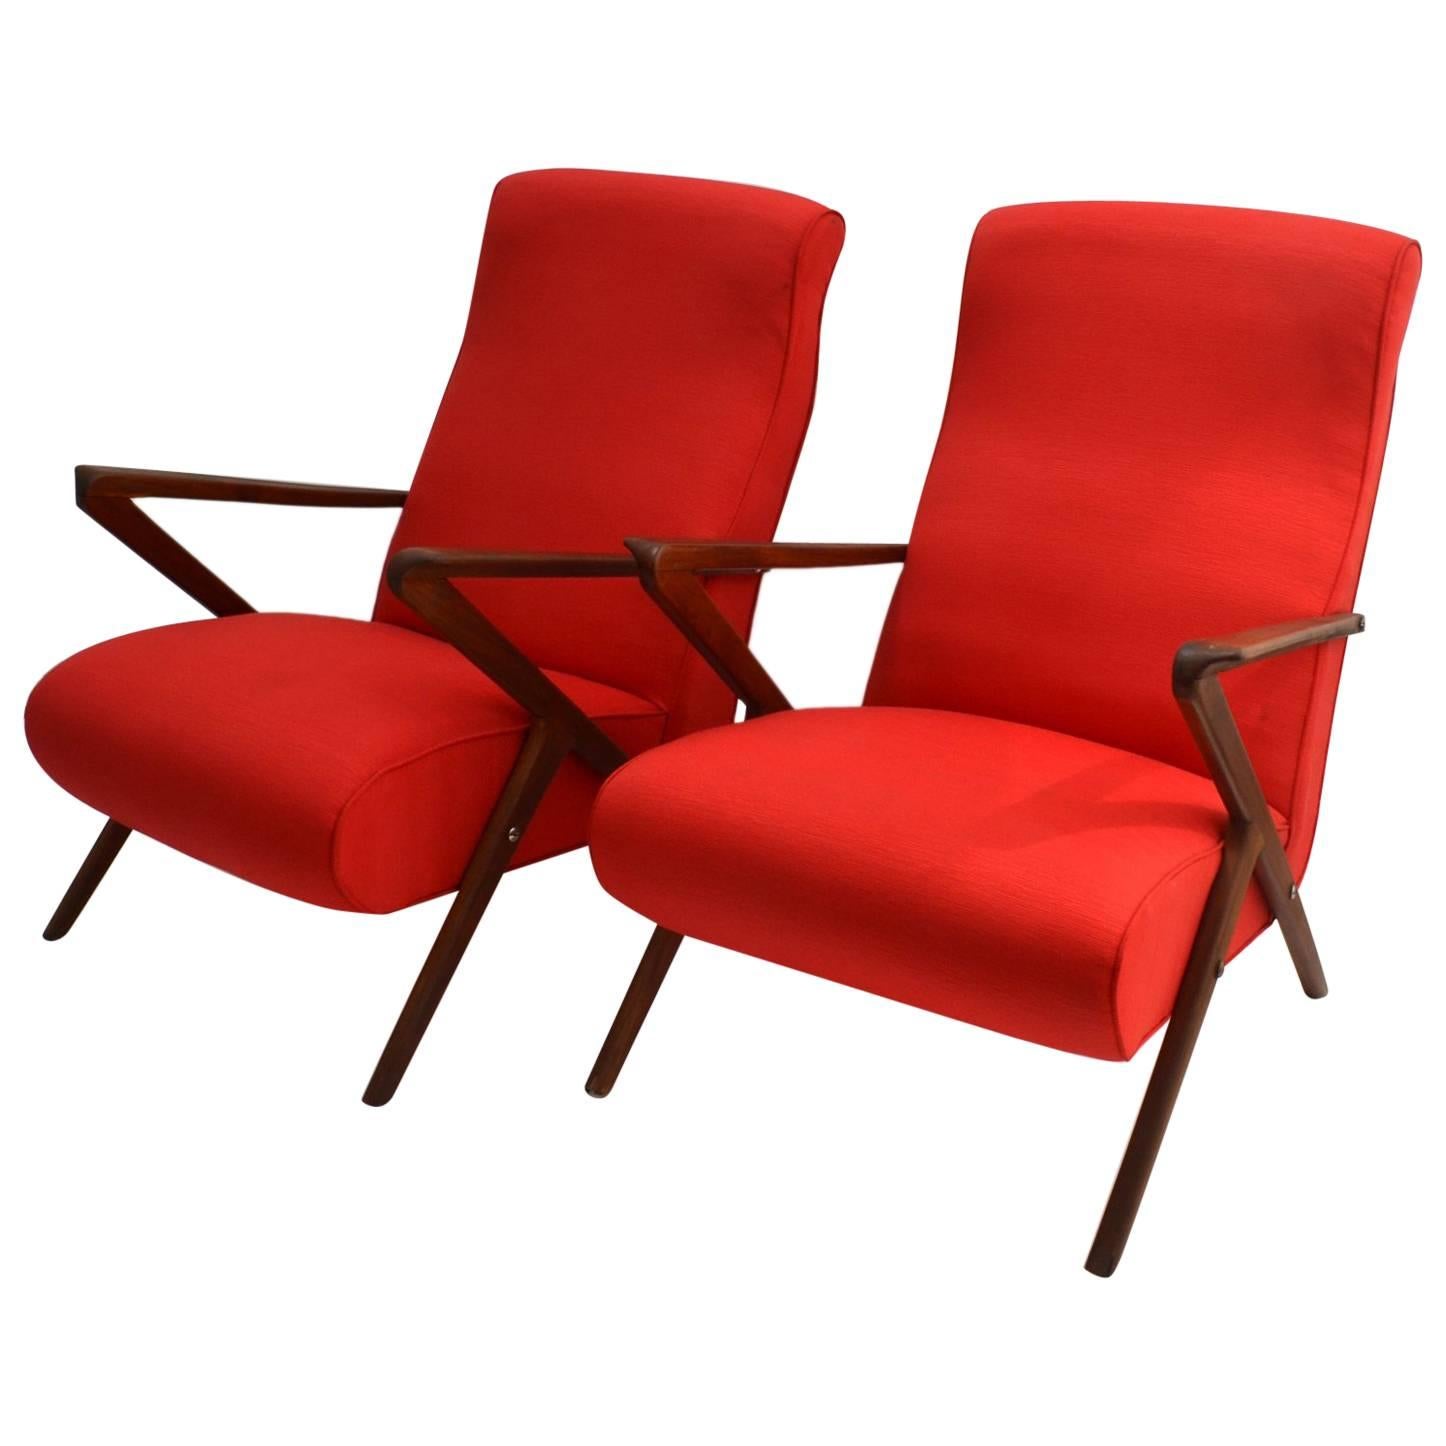 1950s Pair of Red Italian Lounge Chairs, Mahogany Frame with Pronounced Armrests